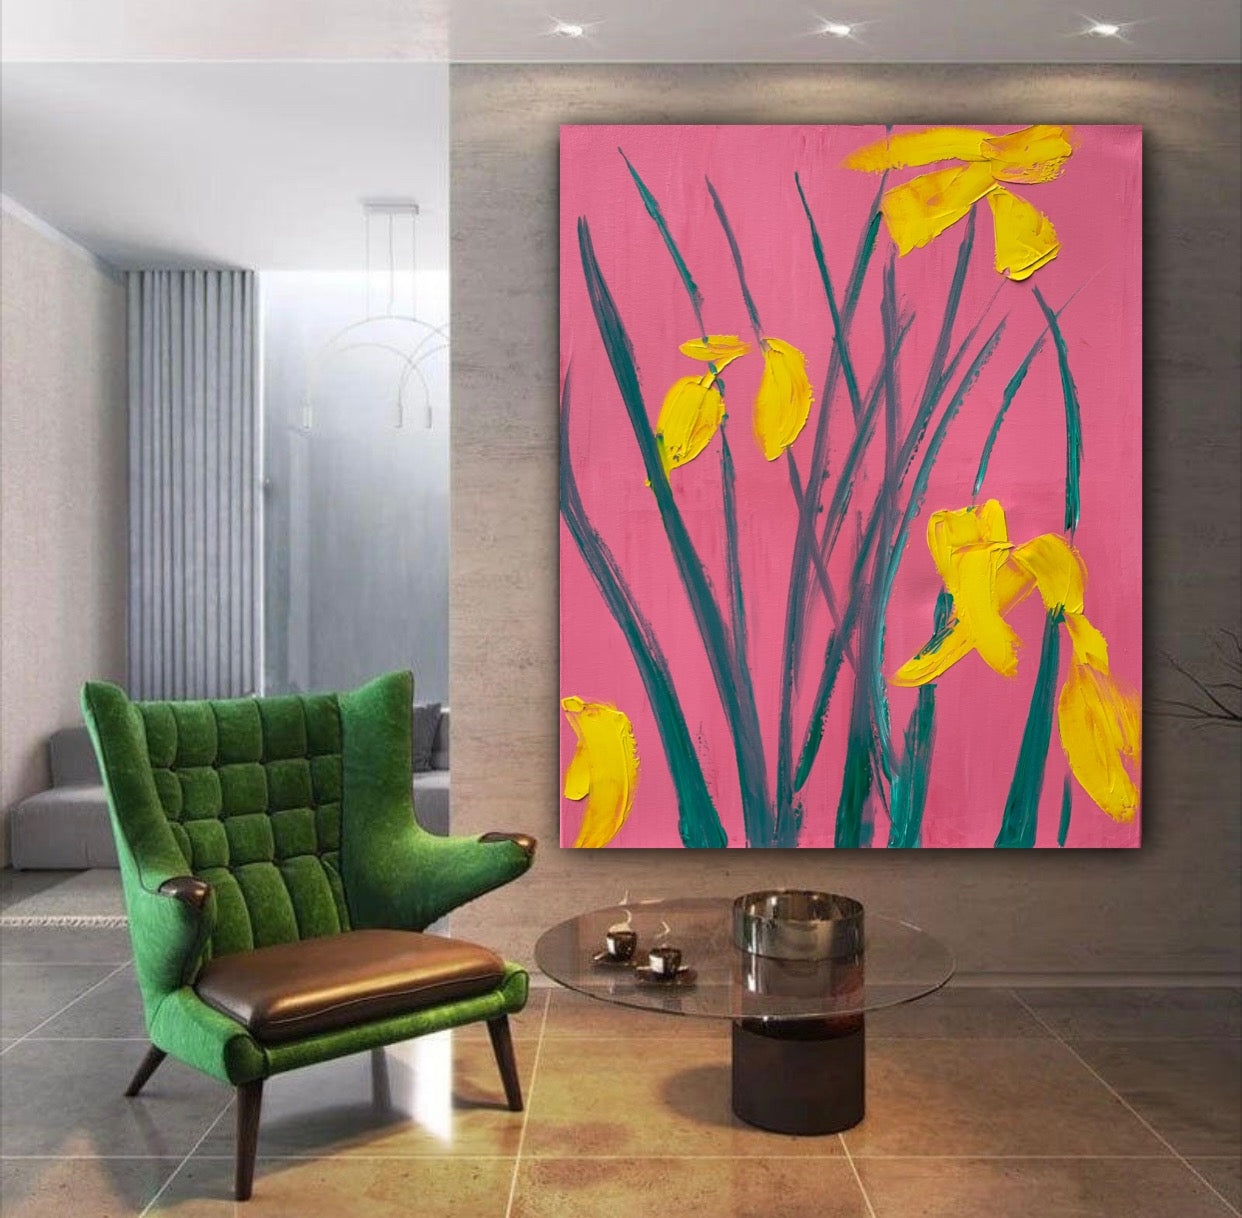 Yellow flowers original abstract oil painting on canvas 76 x 60cm richter style